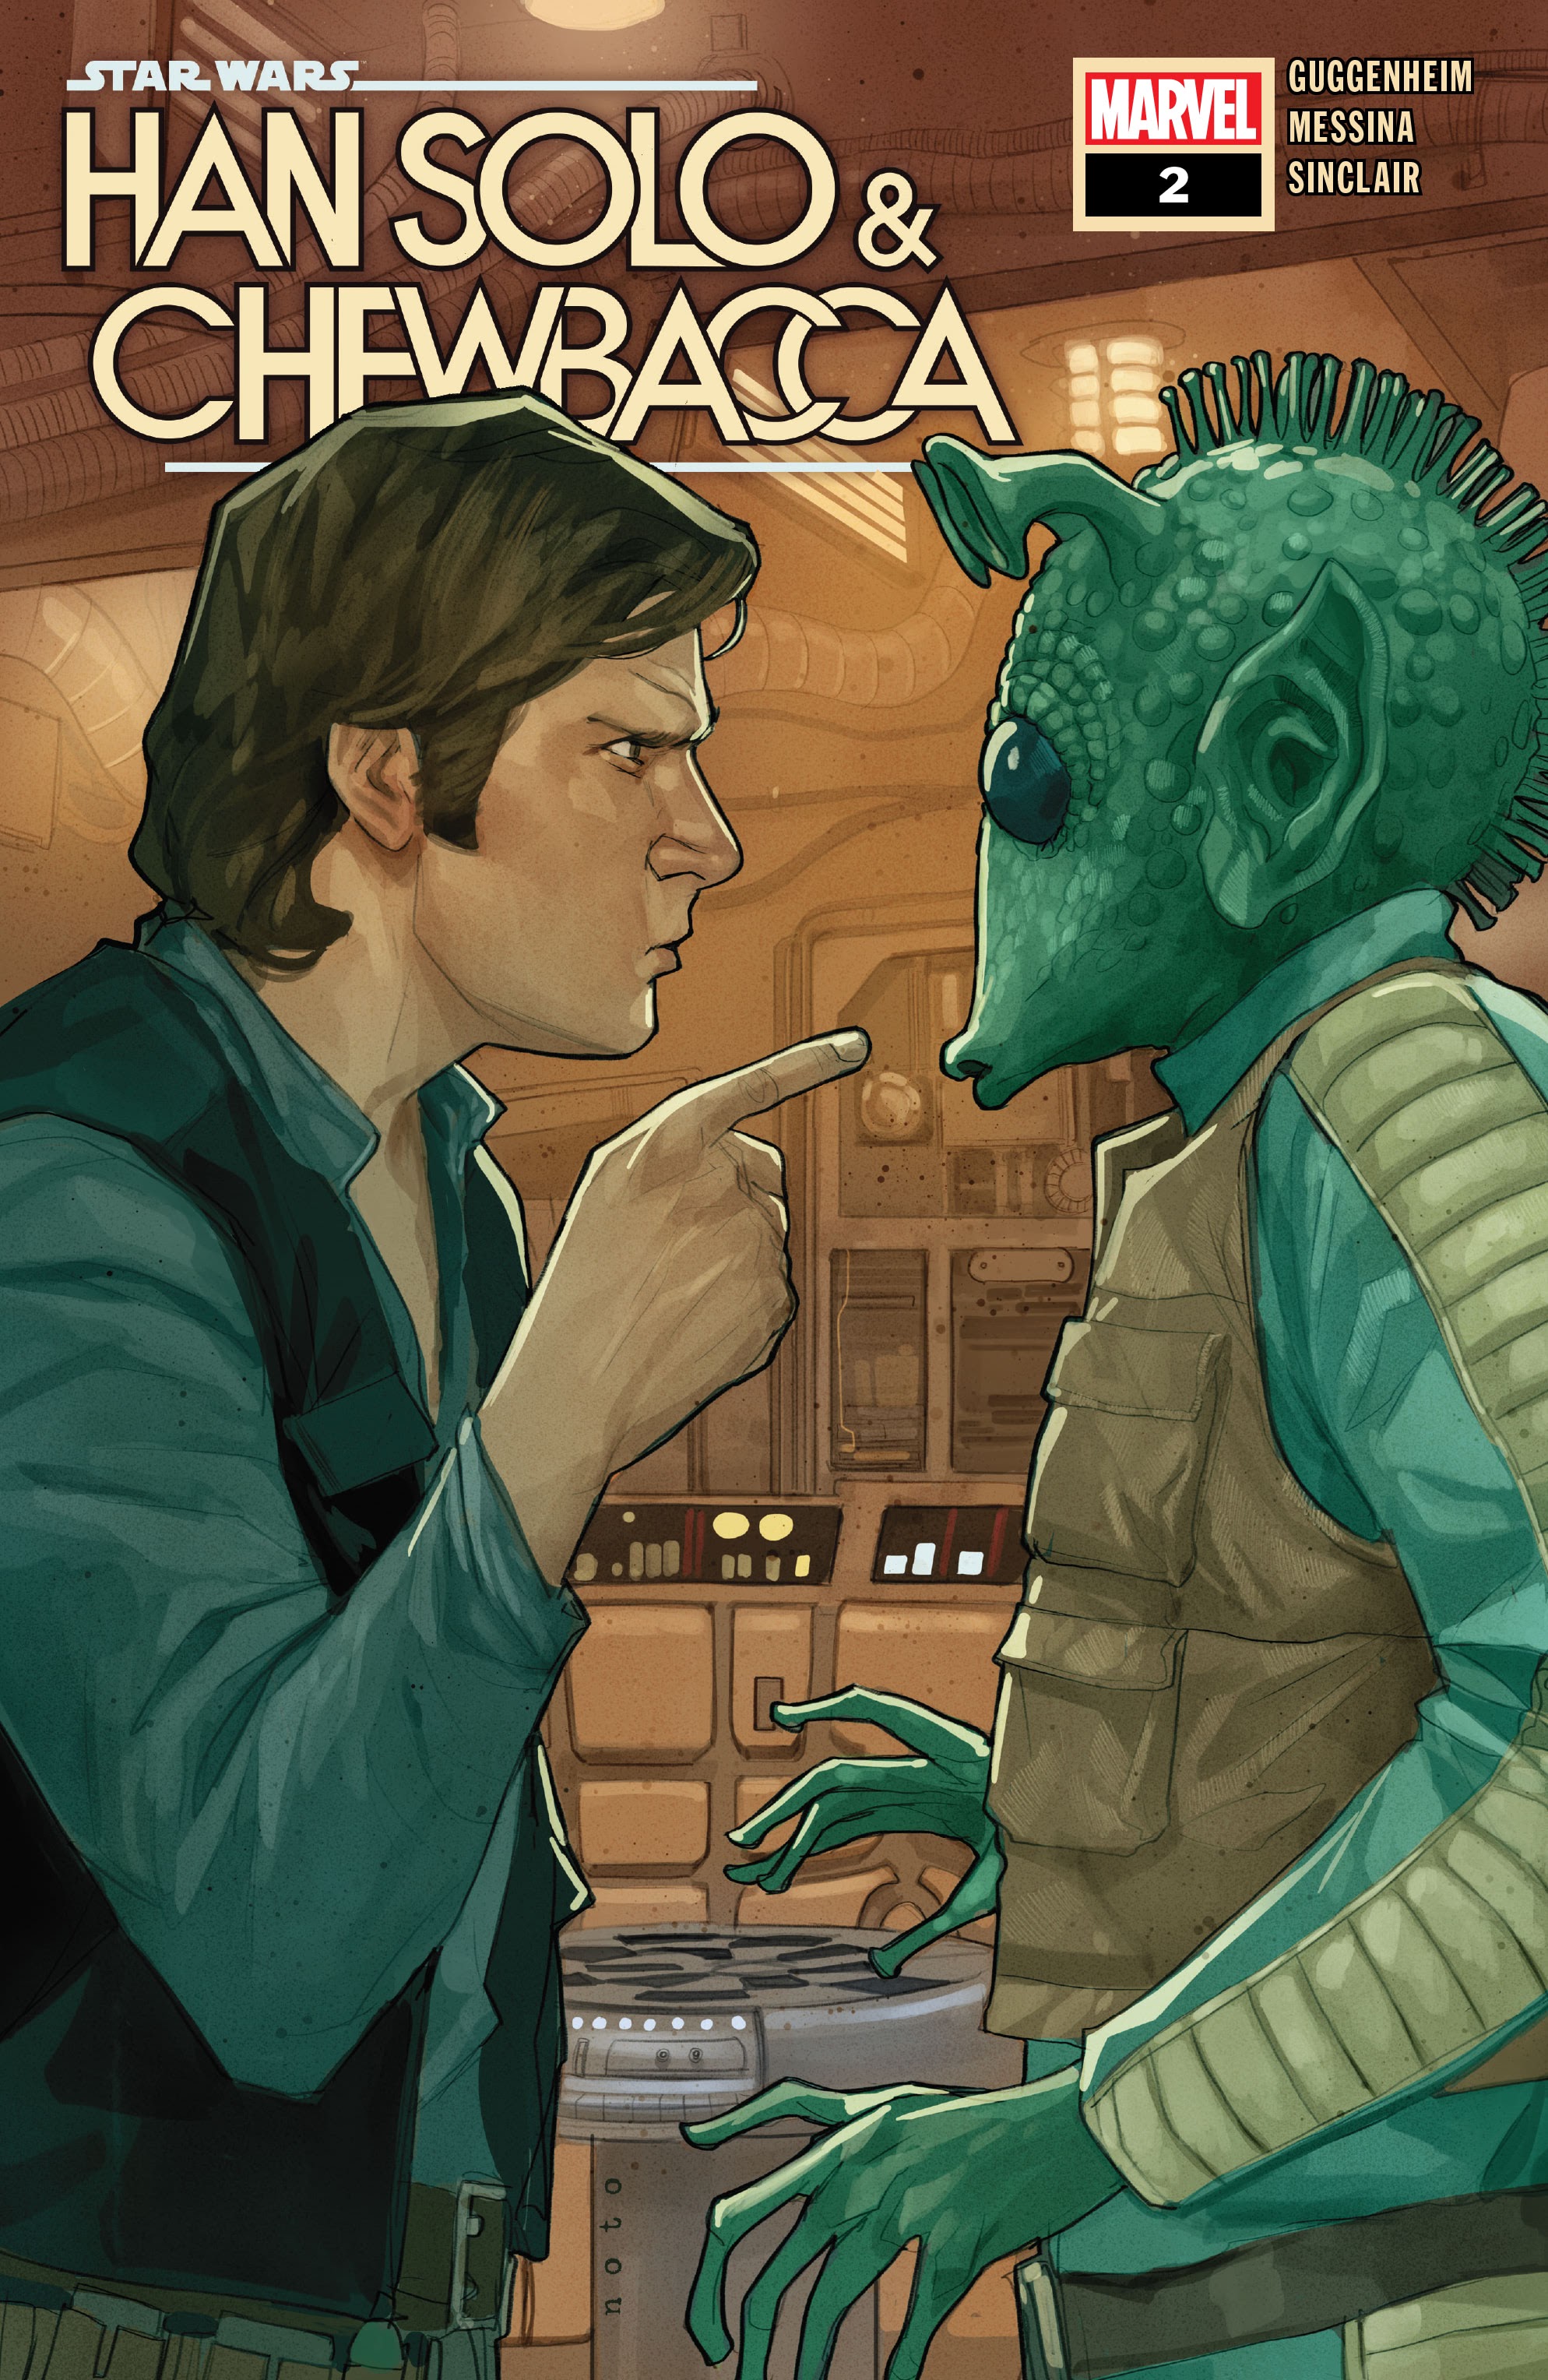 Read online Star Wars: Han Solo & Chewbacca comic -  Issue #2 - 1